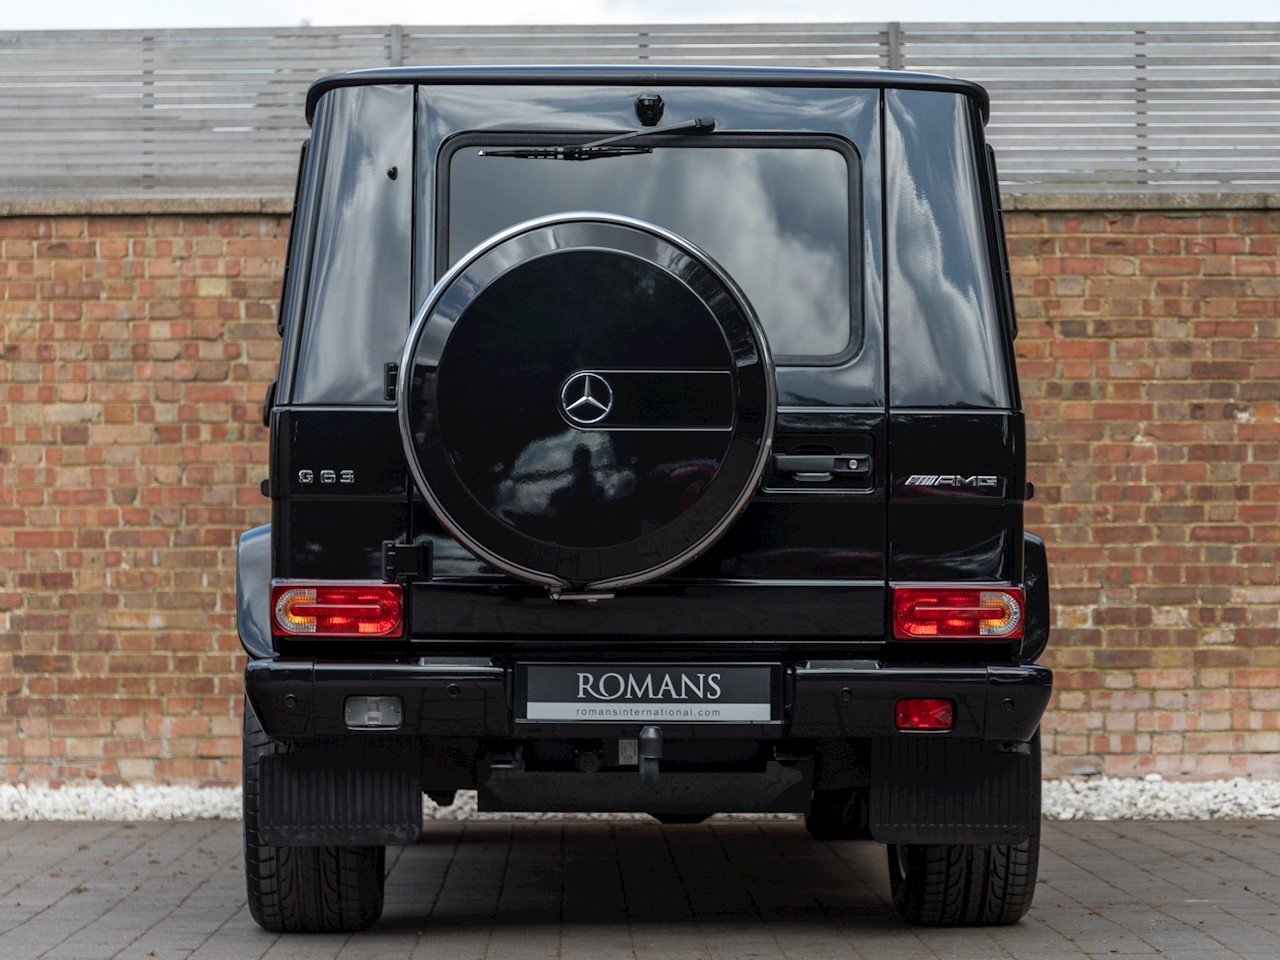 Used Mercedes-Benz G Series AMG for sale | Obsidian Black Metallic